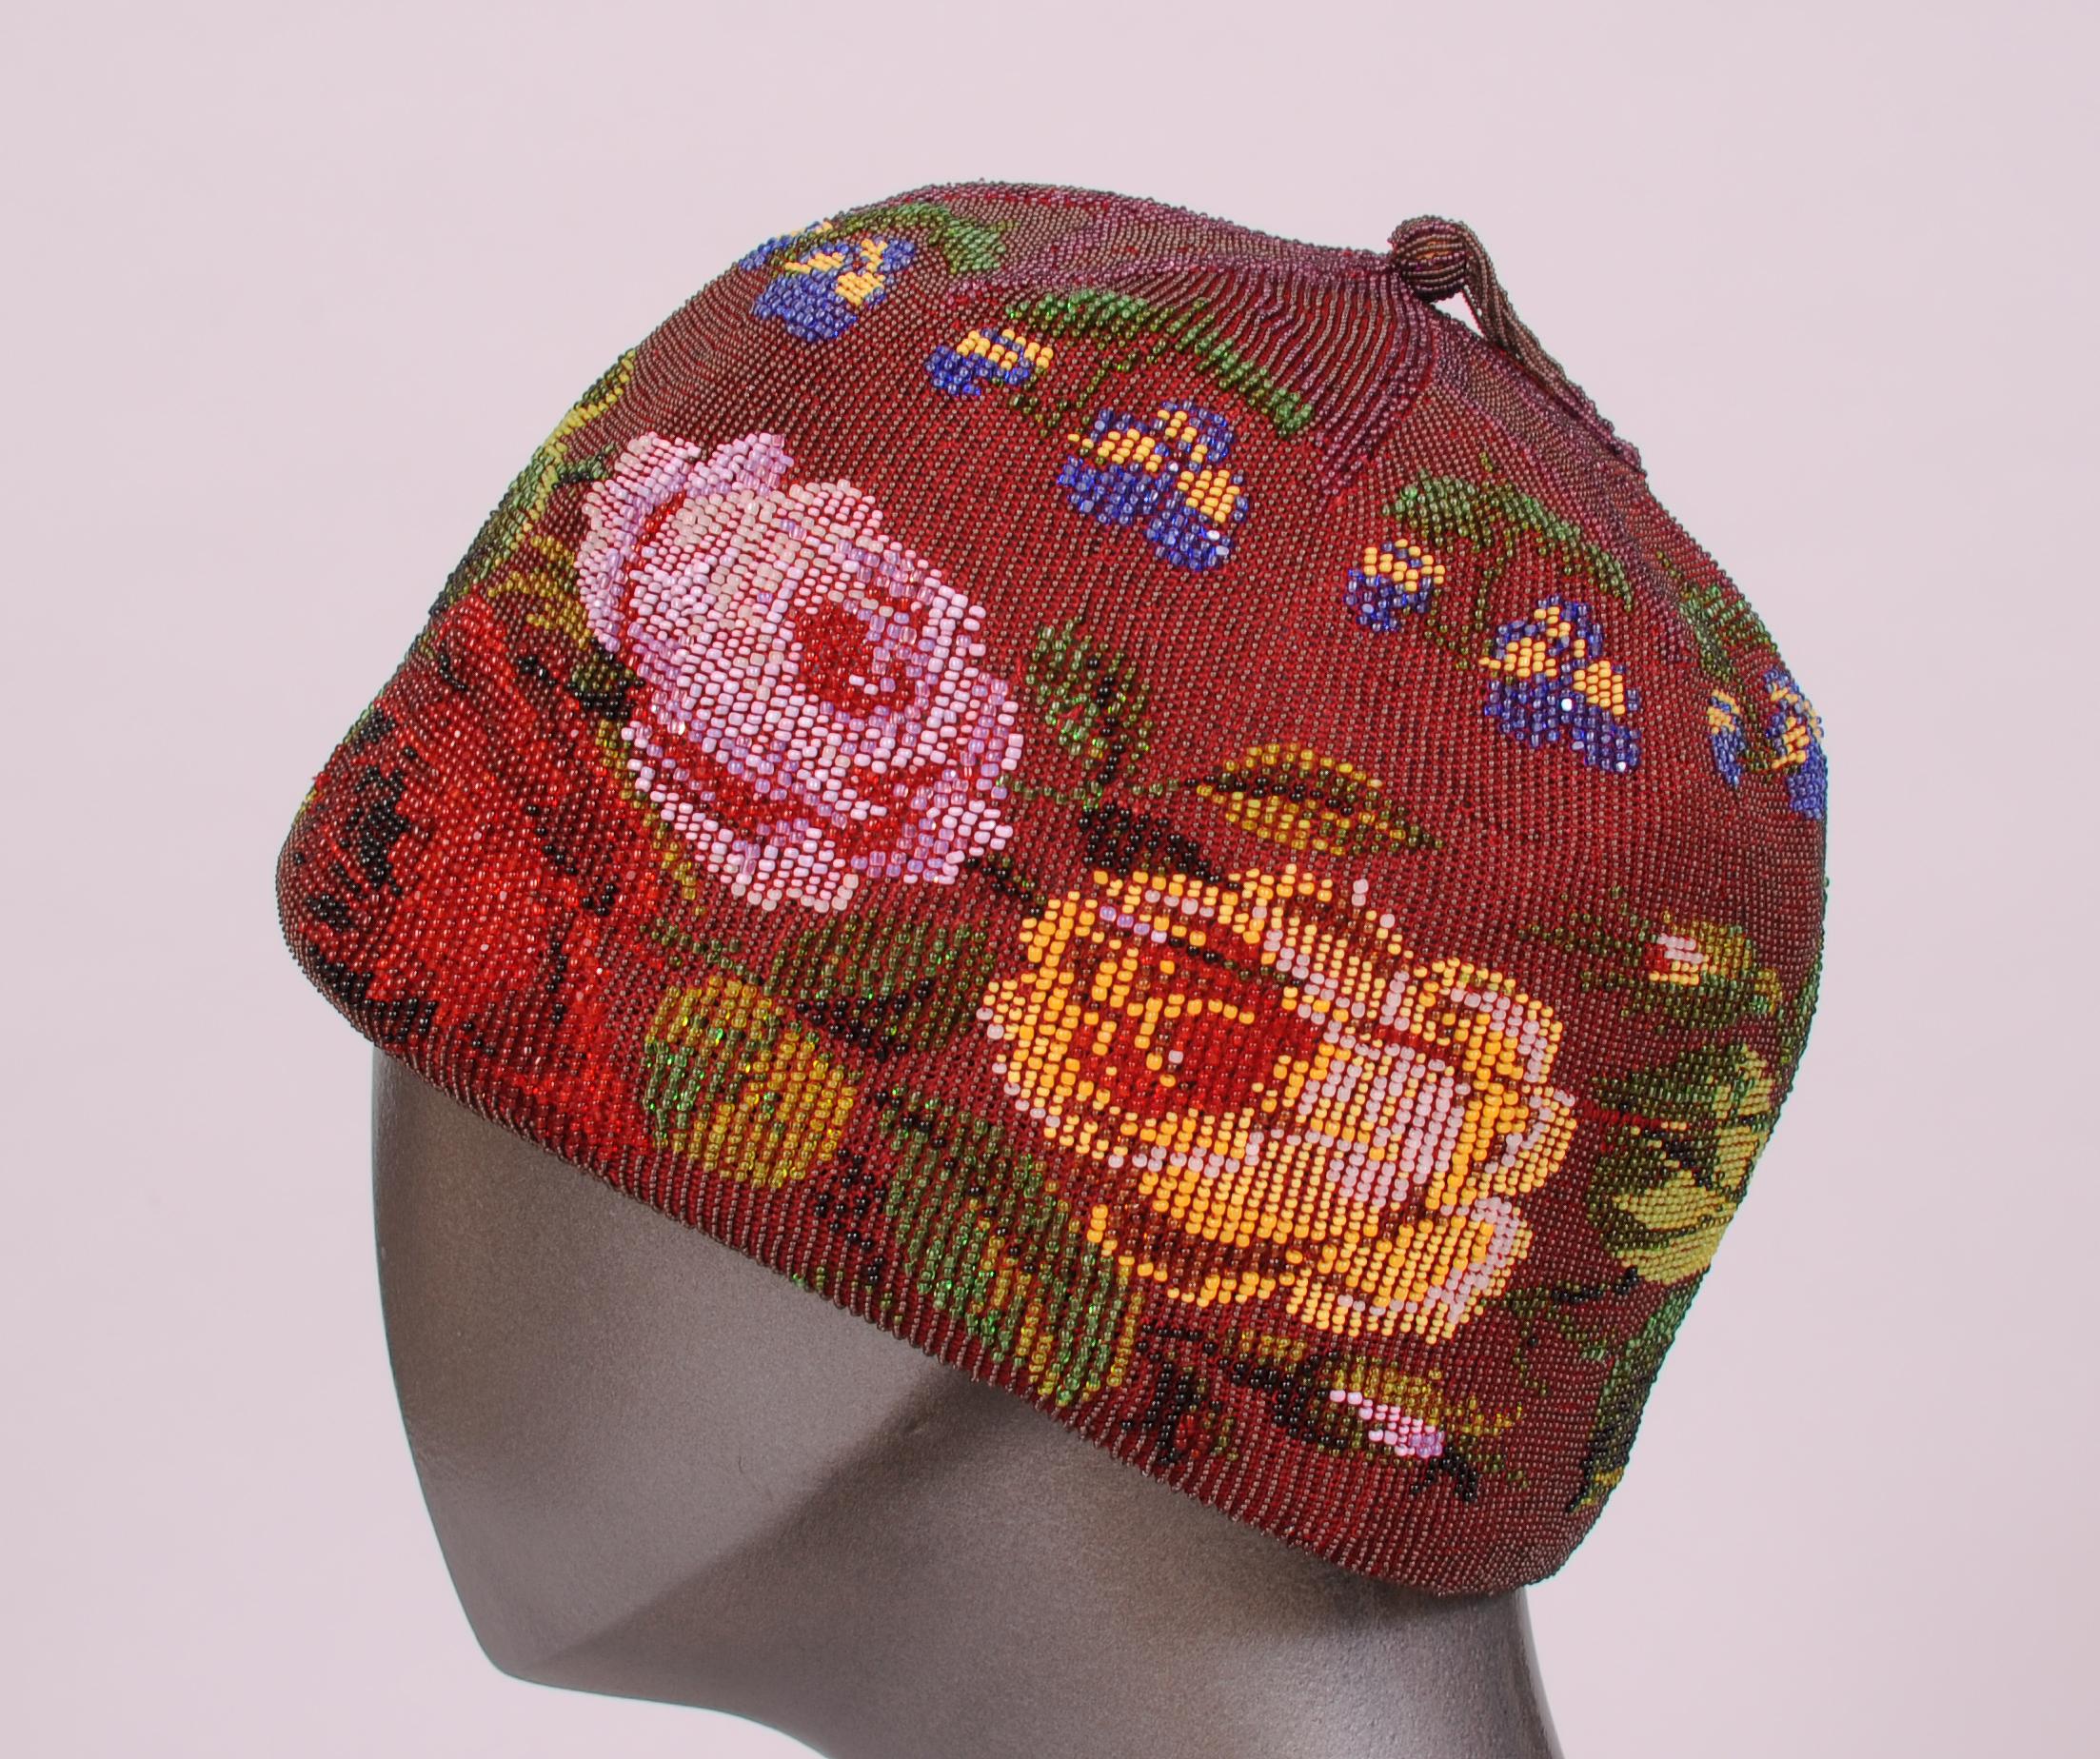 An amazing example of Victorian hand beadwork, this burgundy allover beaded hat has large flowers in pink, red and yellow with green leaves all around the edge. Smaller blue and yellow flowers with green leaves surround the top. It is completed by a